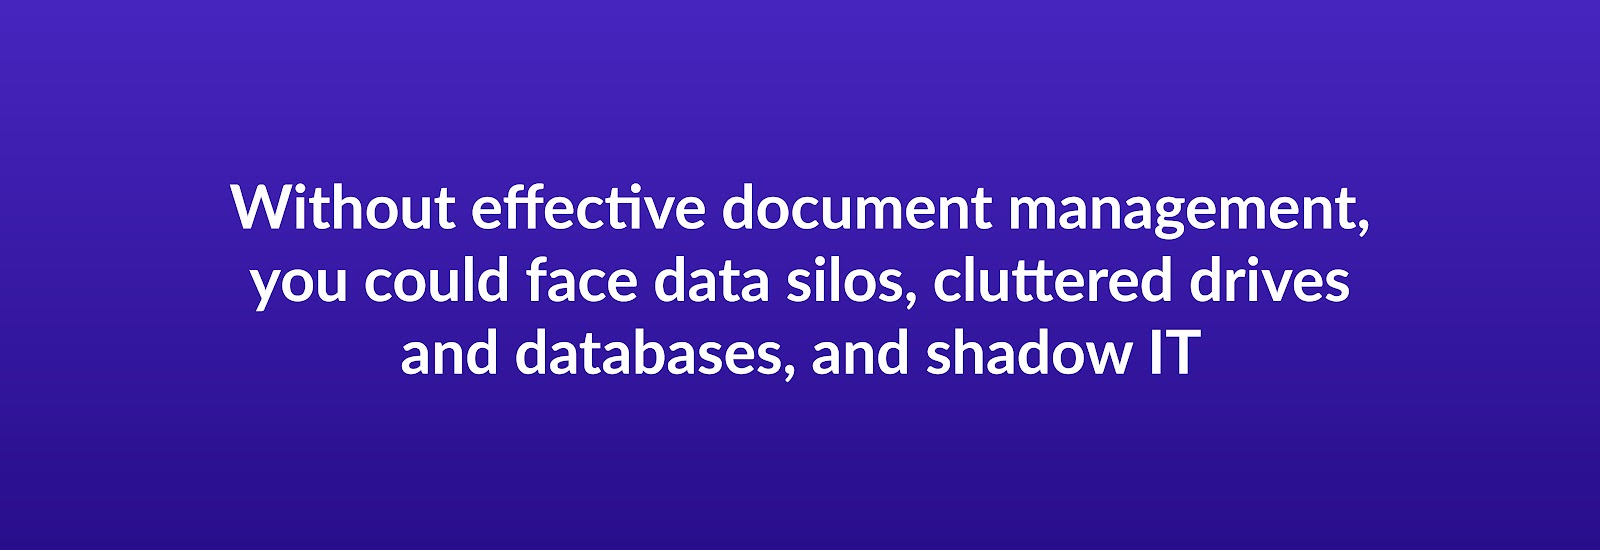 Without effective document management, you could face data silos, cluttered drives and databases, and shadow IT